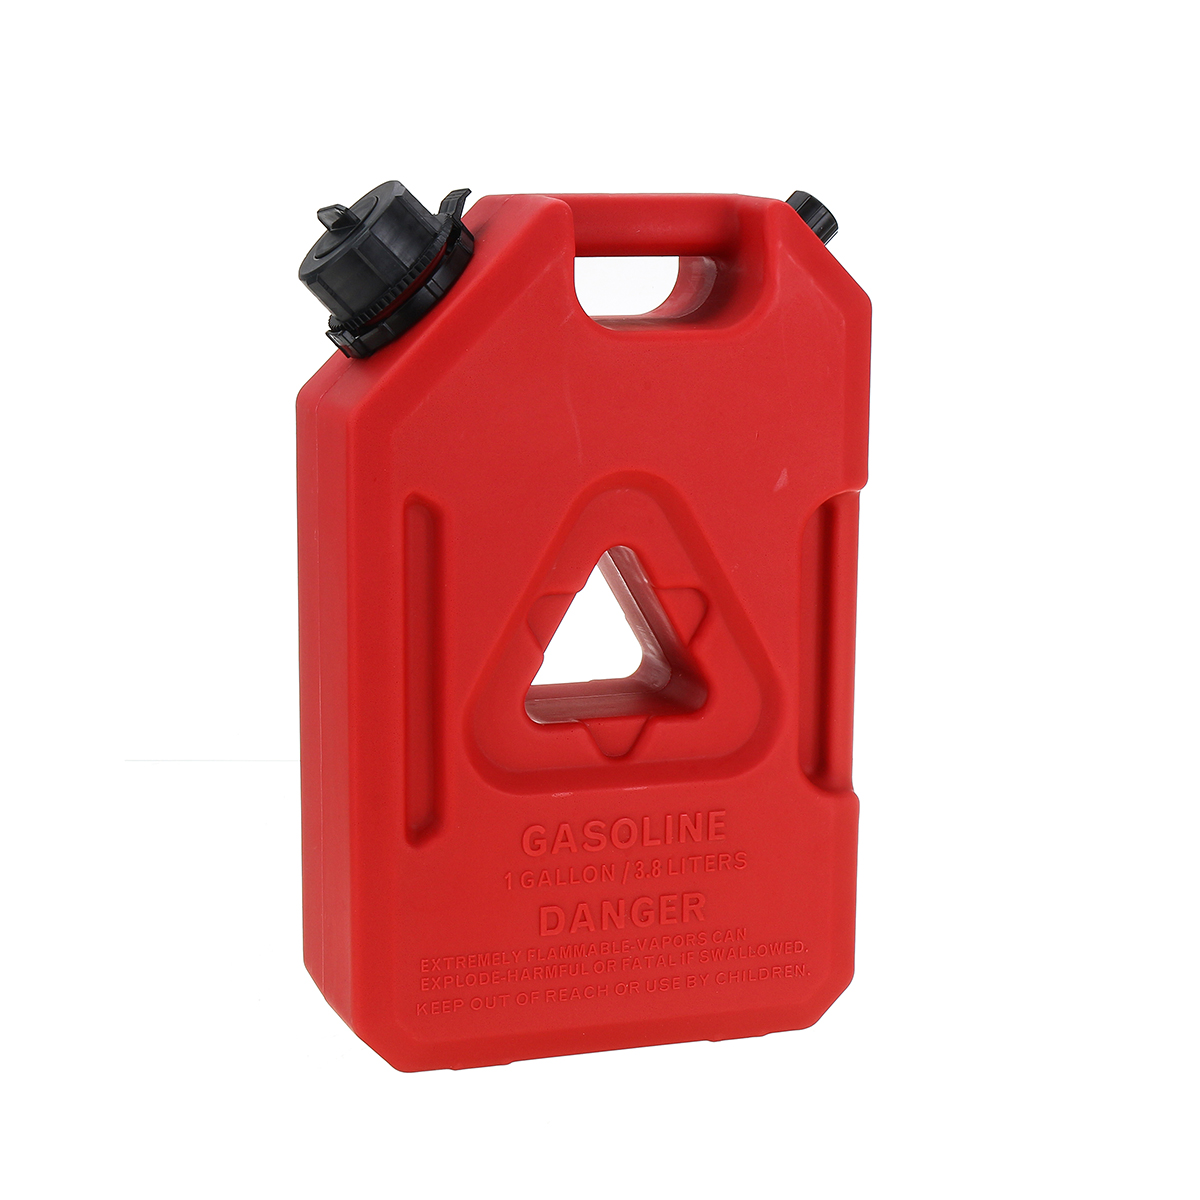 3.8L/7.5L Fuel Container Petrol Gas Fuel Plastic Can Tank Spare Portable Heavy Duty